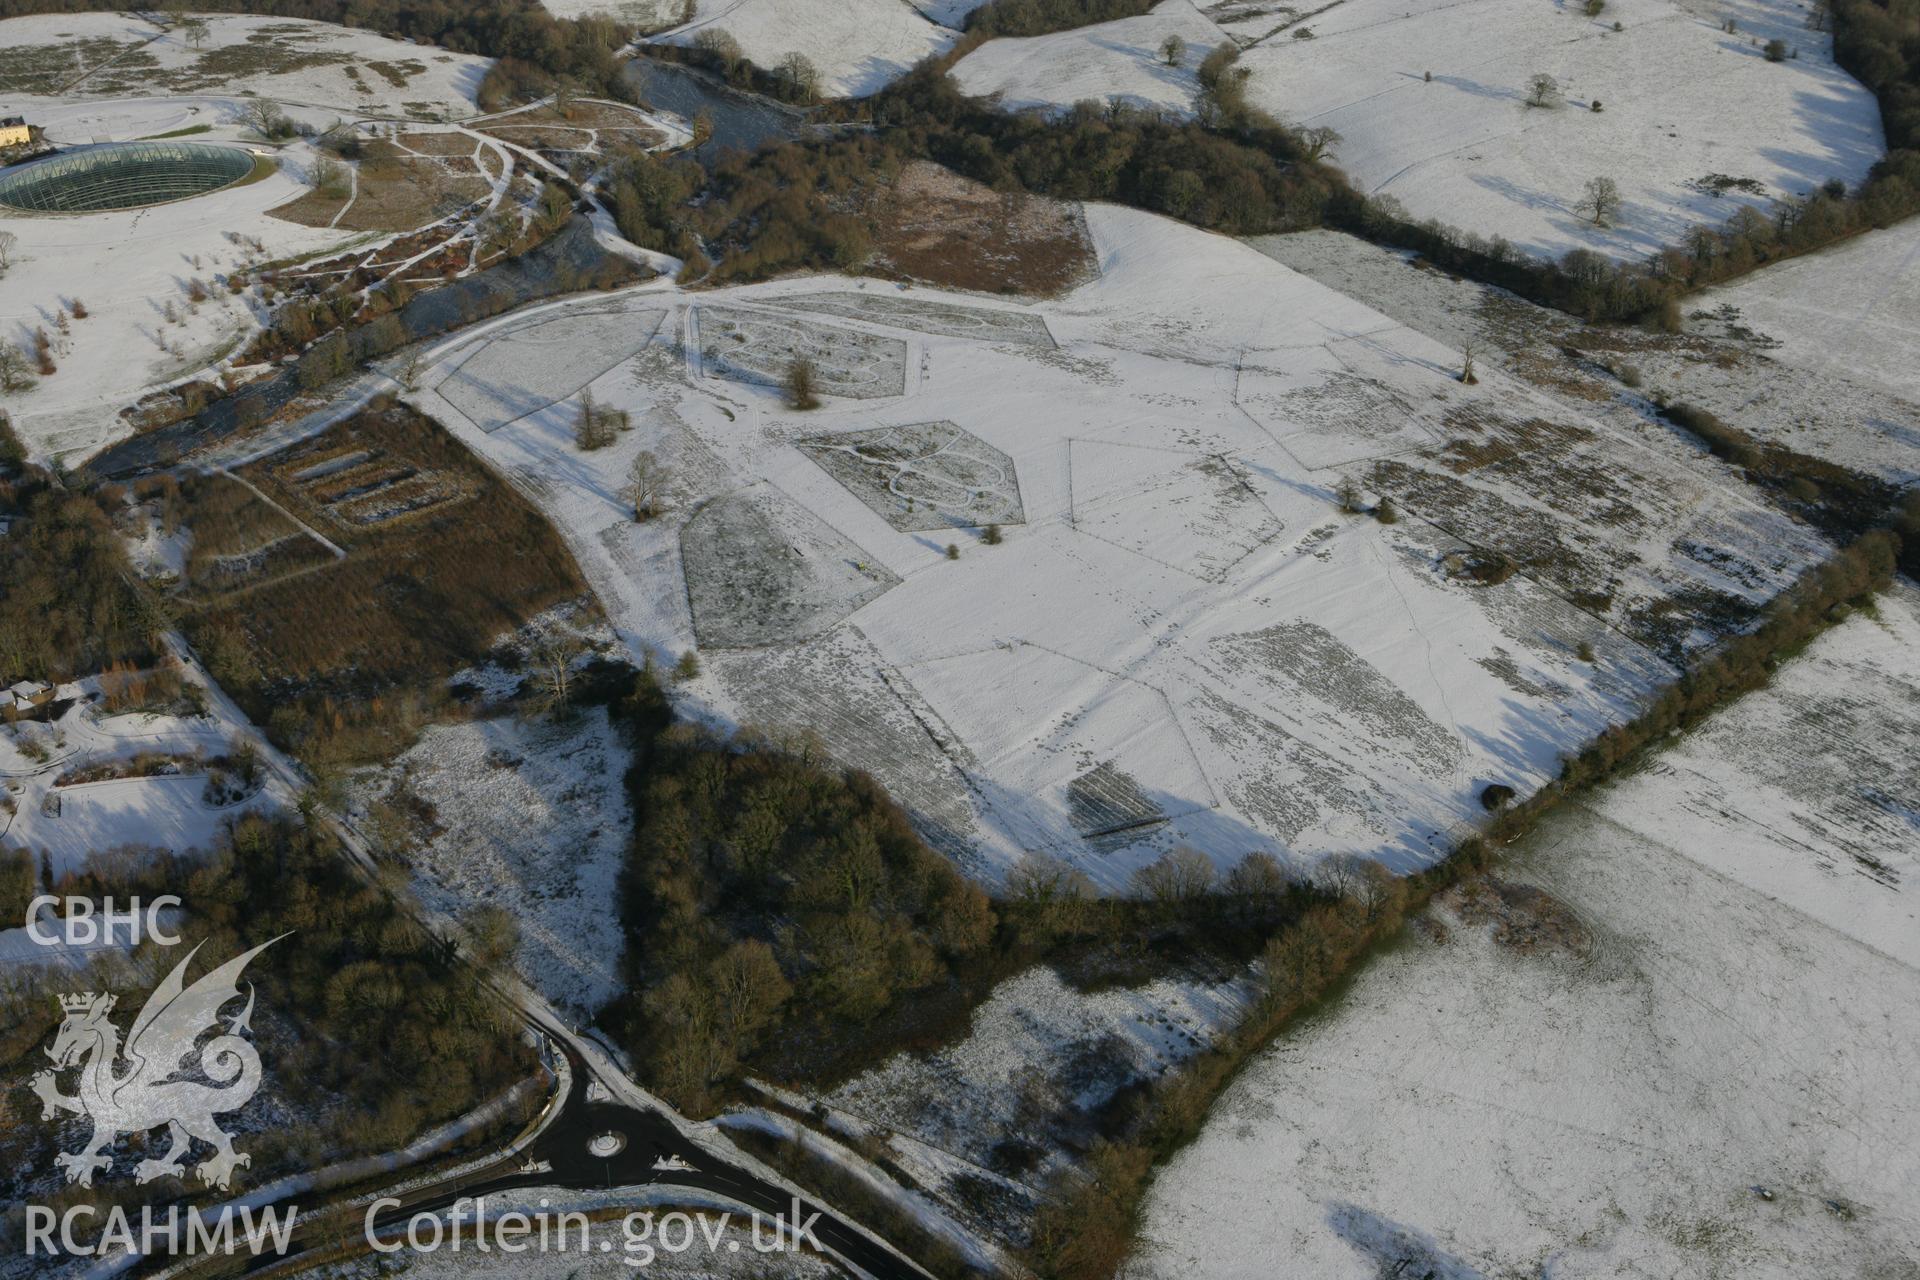 RCAHMW colour oblique photograph of the National Botanic Garden of Wales, showing planting schemes under snow. Taken by Toby Driver on 01/12/2010.